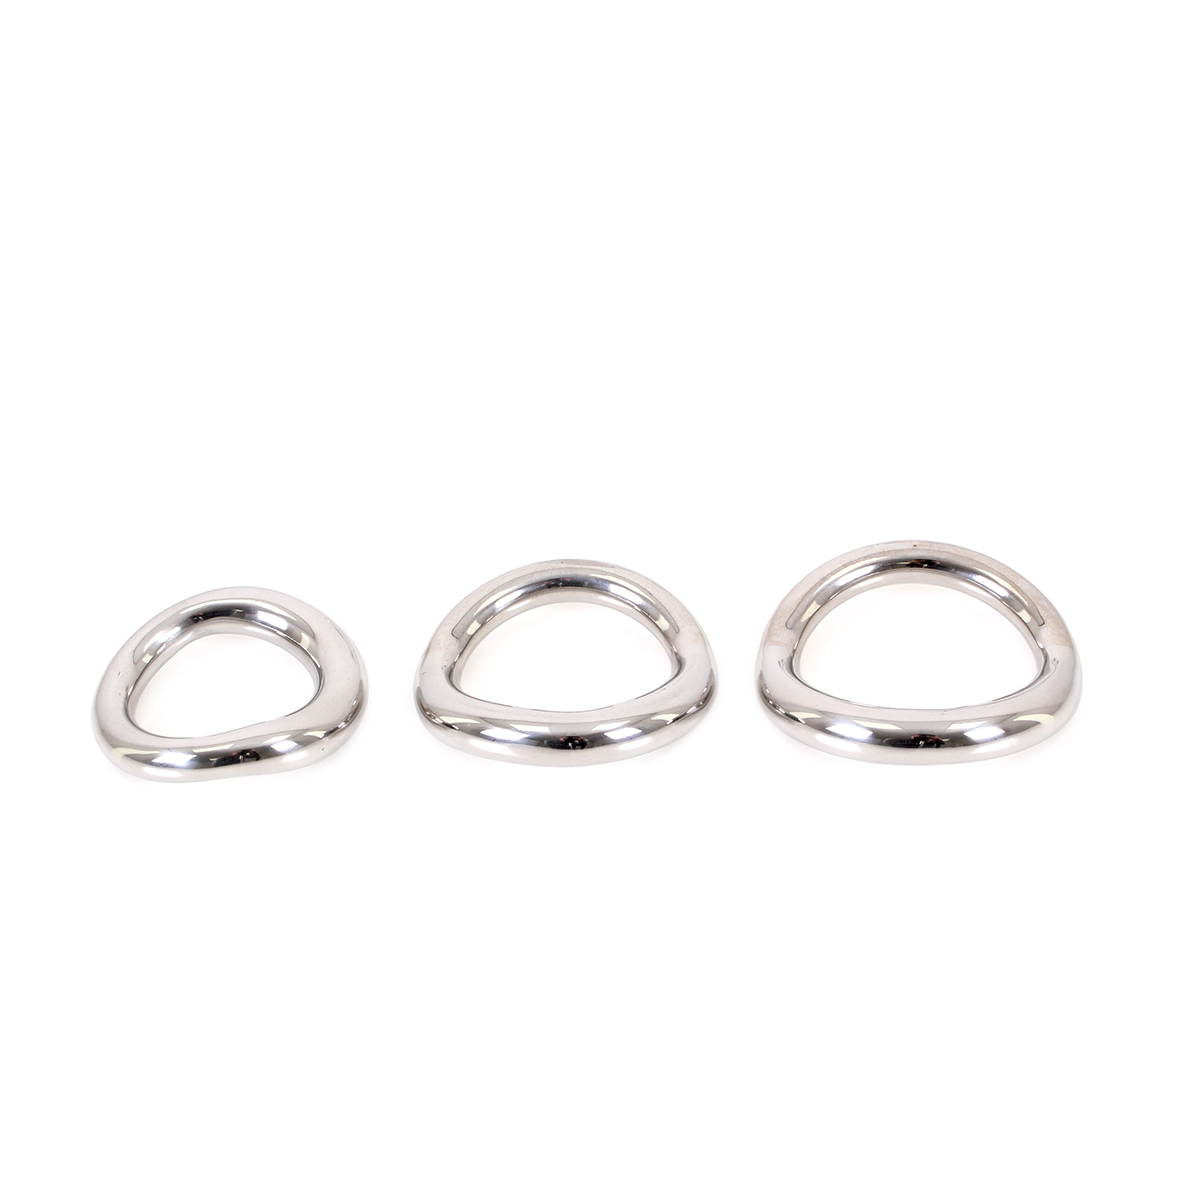 Costum-Fit-Cockring-40-mm-OPR-277044-4